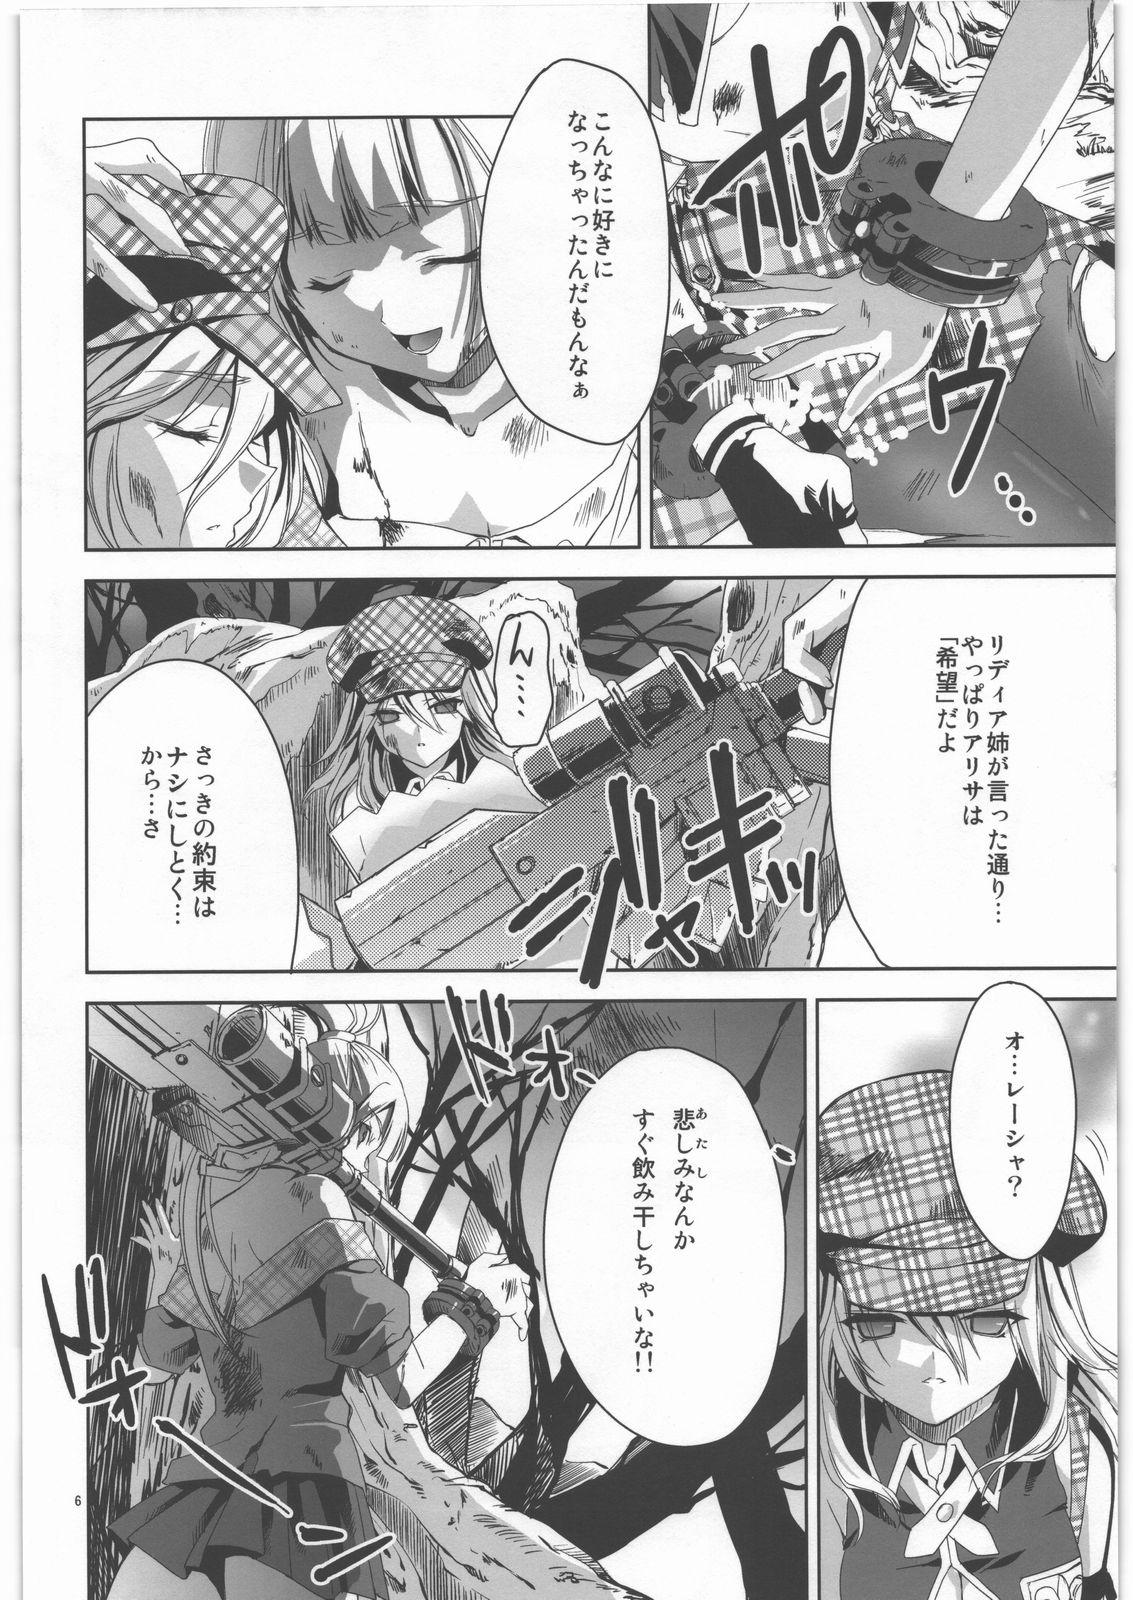 Blondes AUW:2 - God eater Girl Get Fuck - Page 5